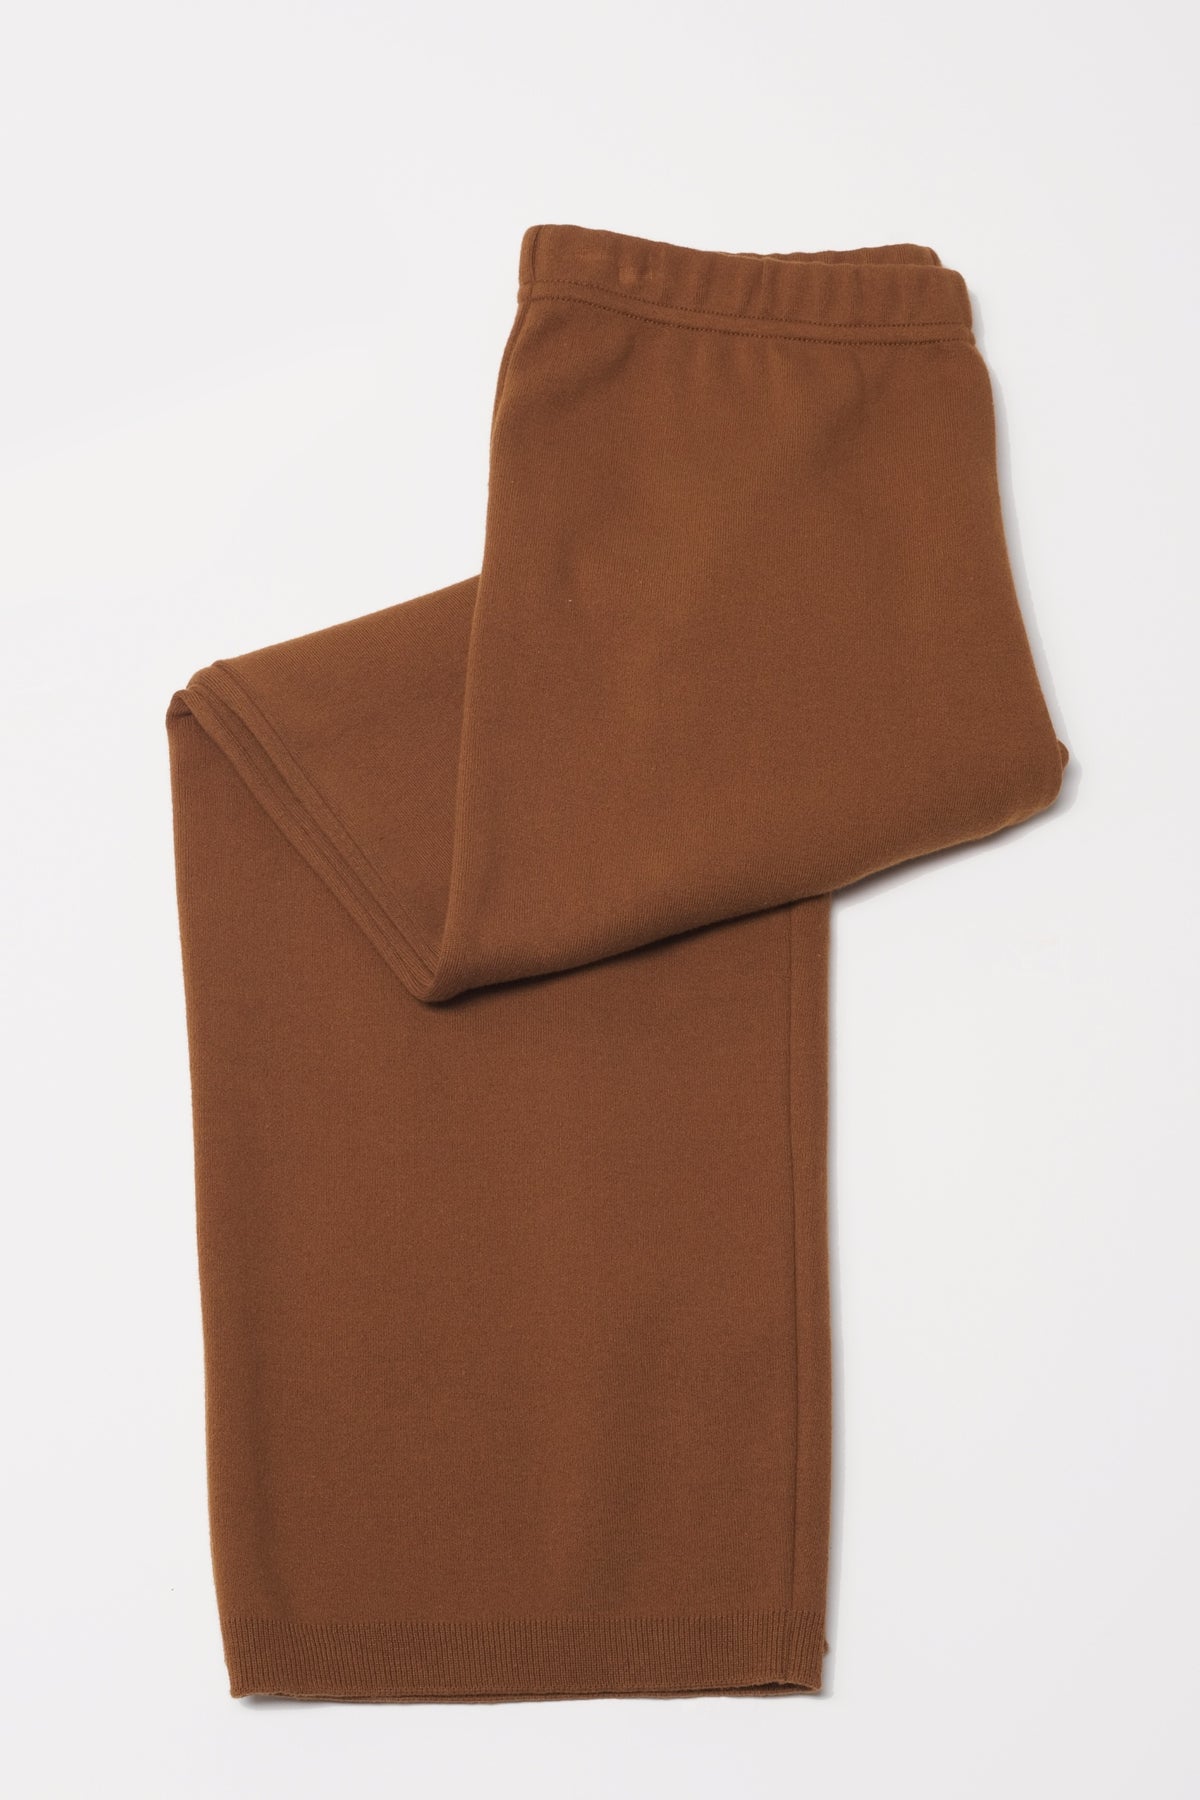 36" Ankle Easy Trousers New Orleans Knitwear